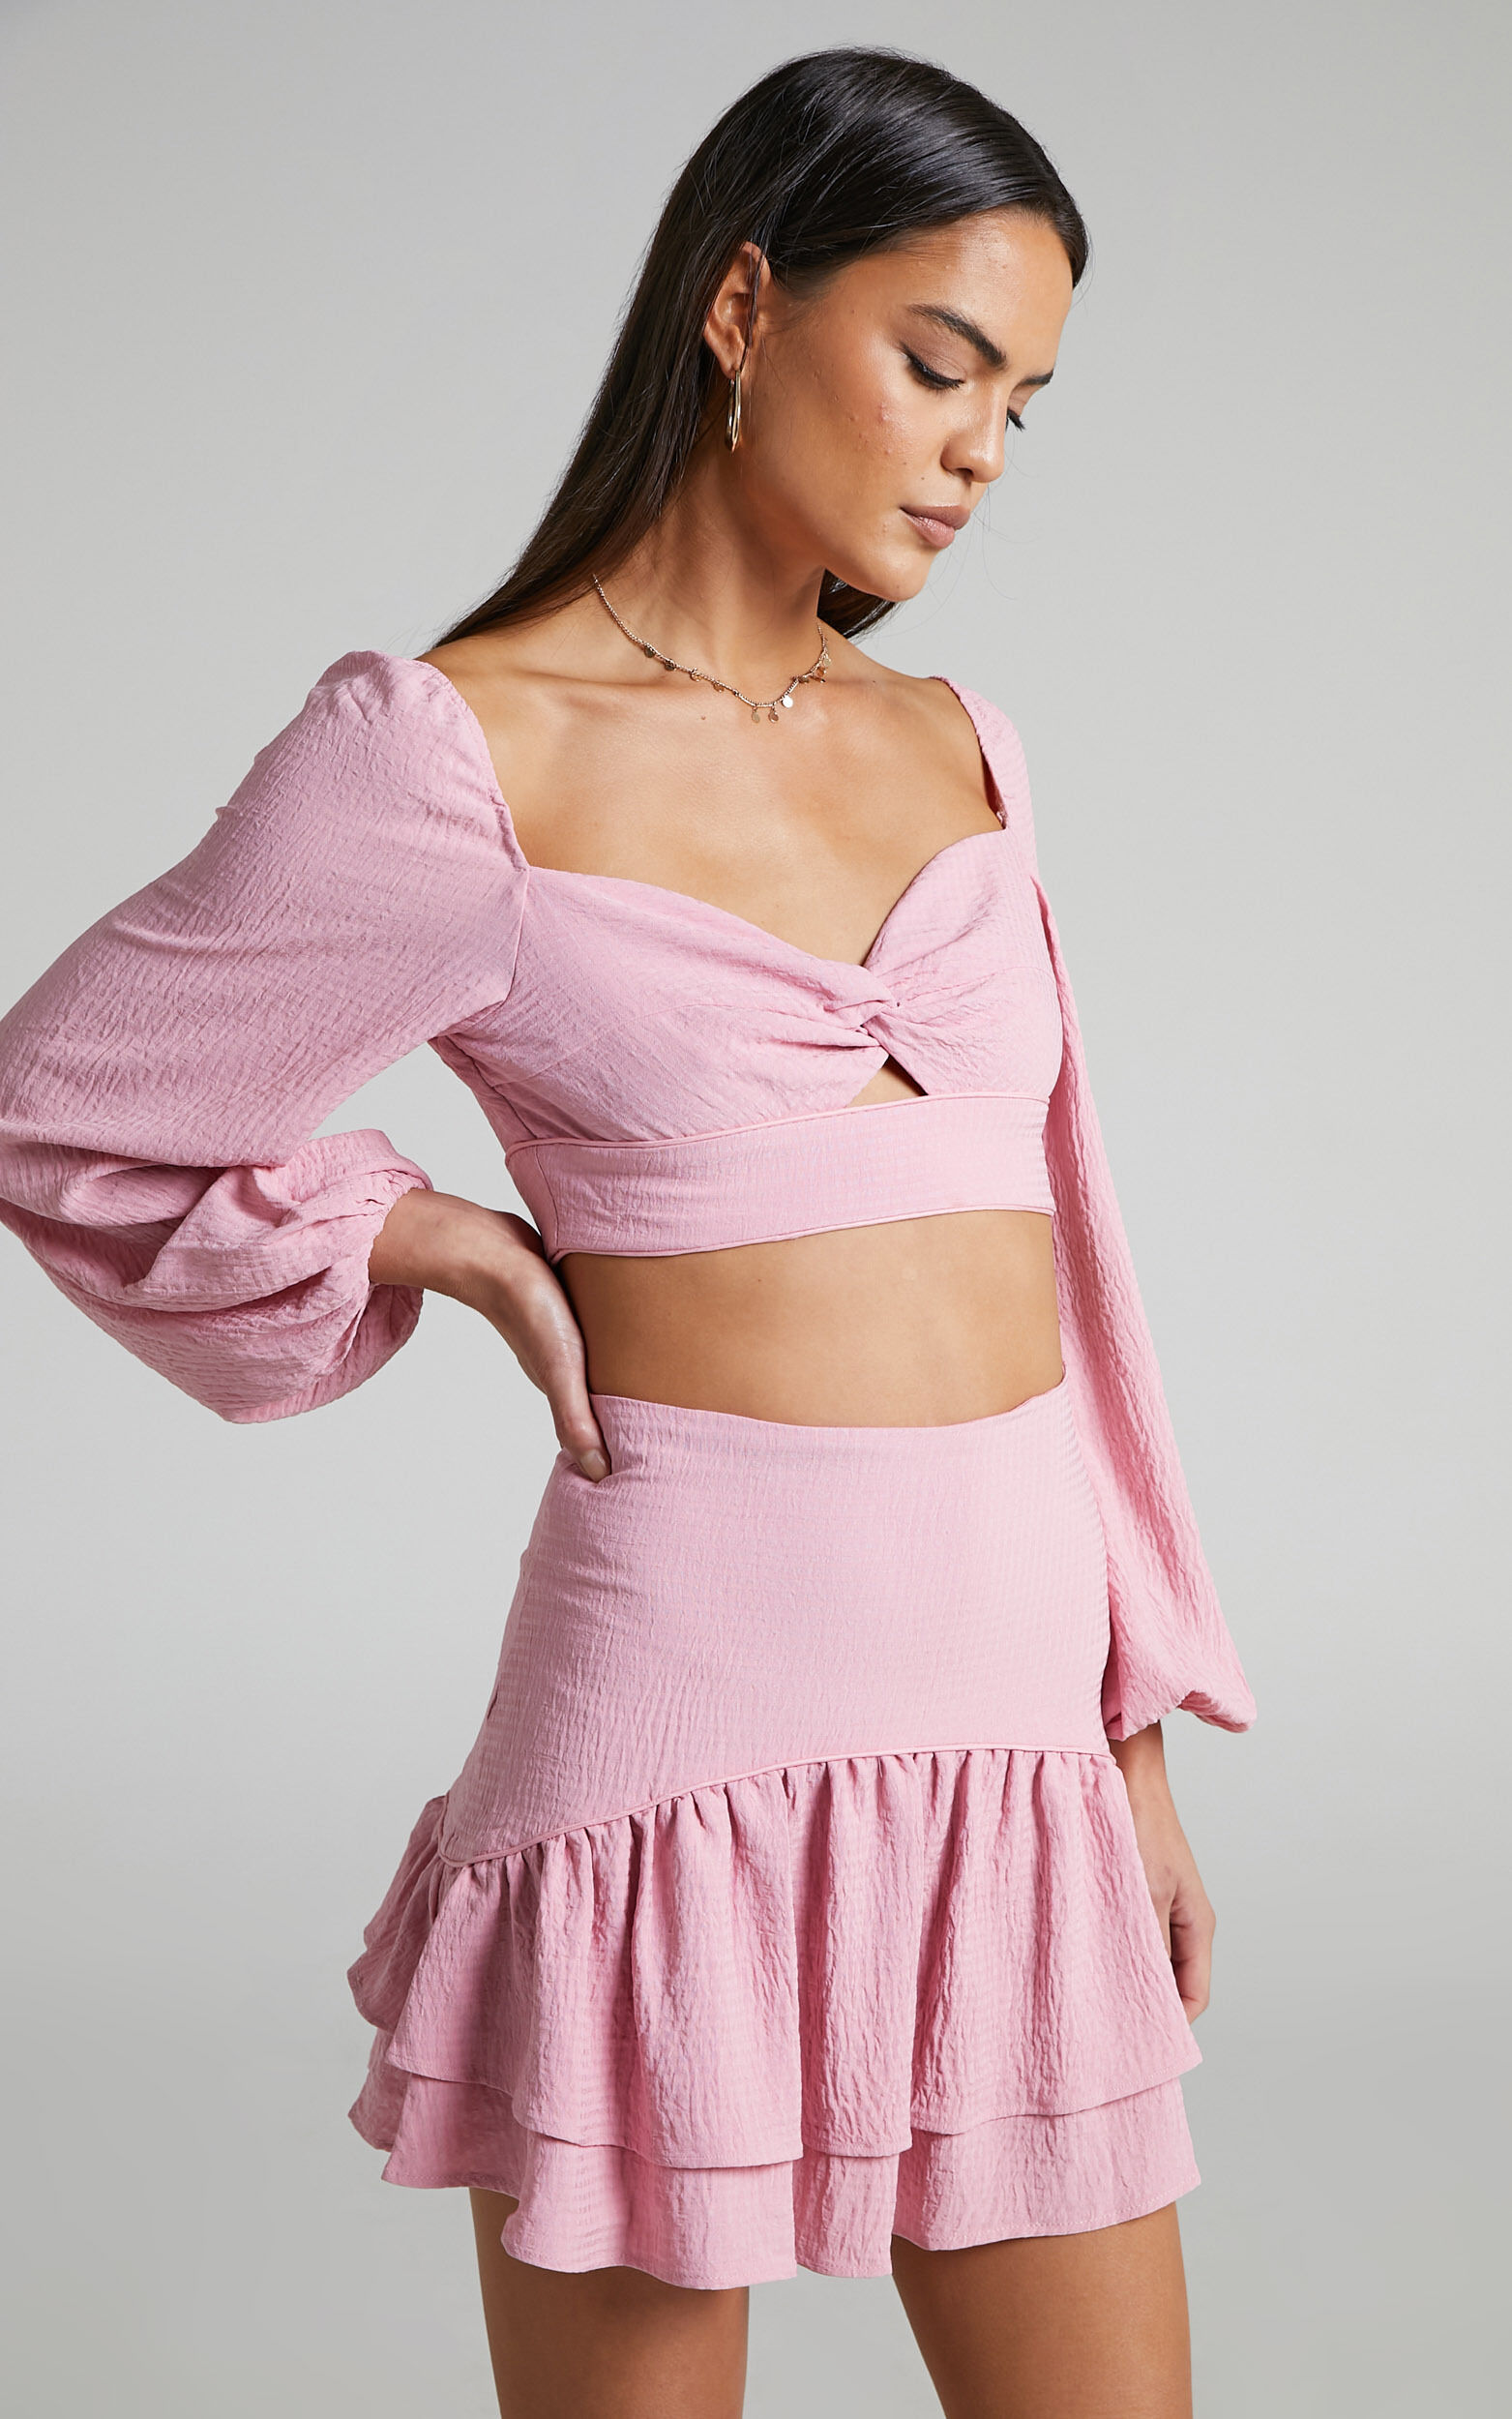 Razille Two Piece Set - Twist Front Long Sleeve Crop Top and Mini Skirt Set in Pink - 04, PNK1